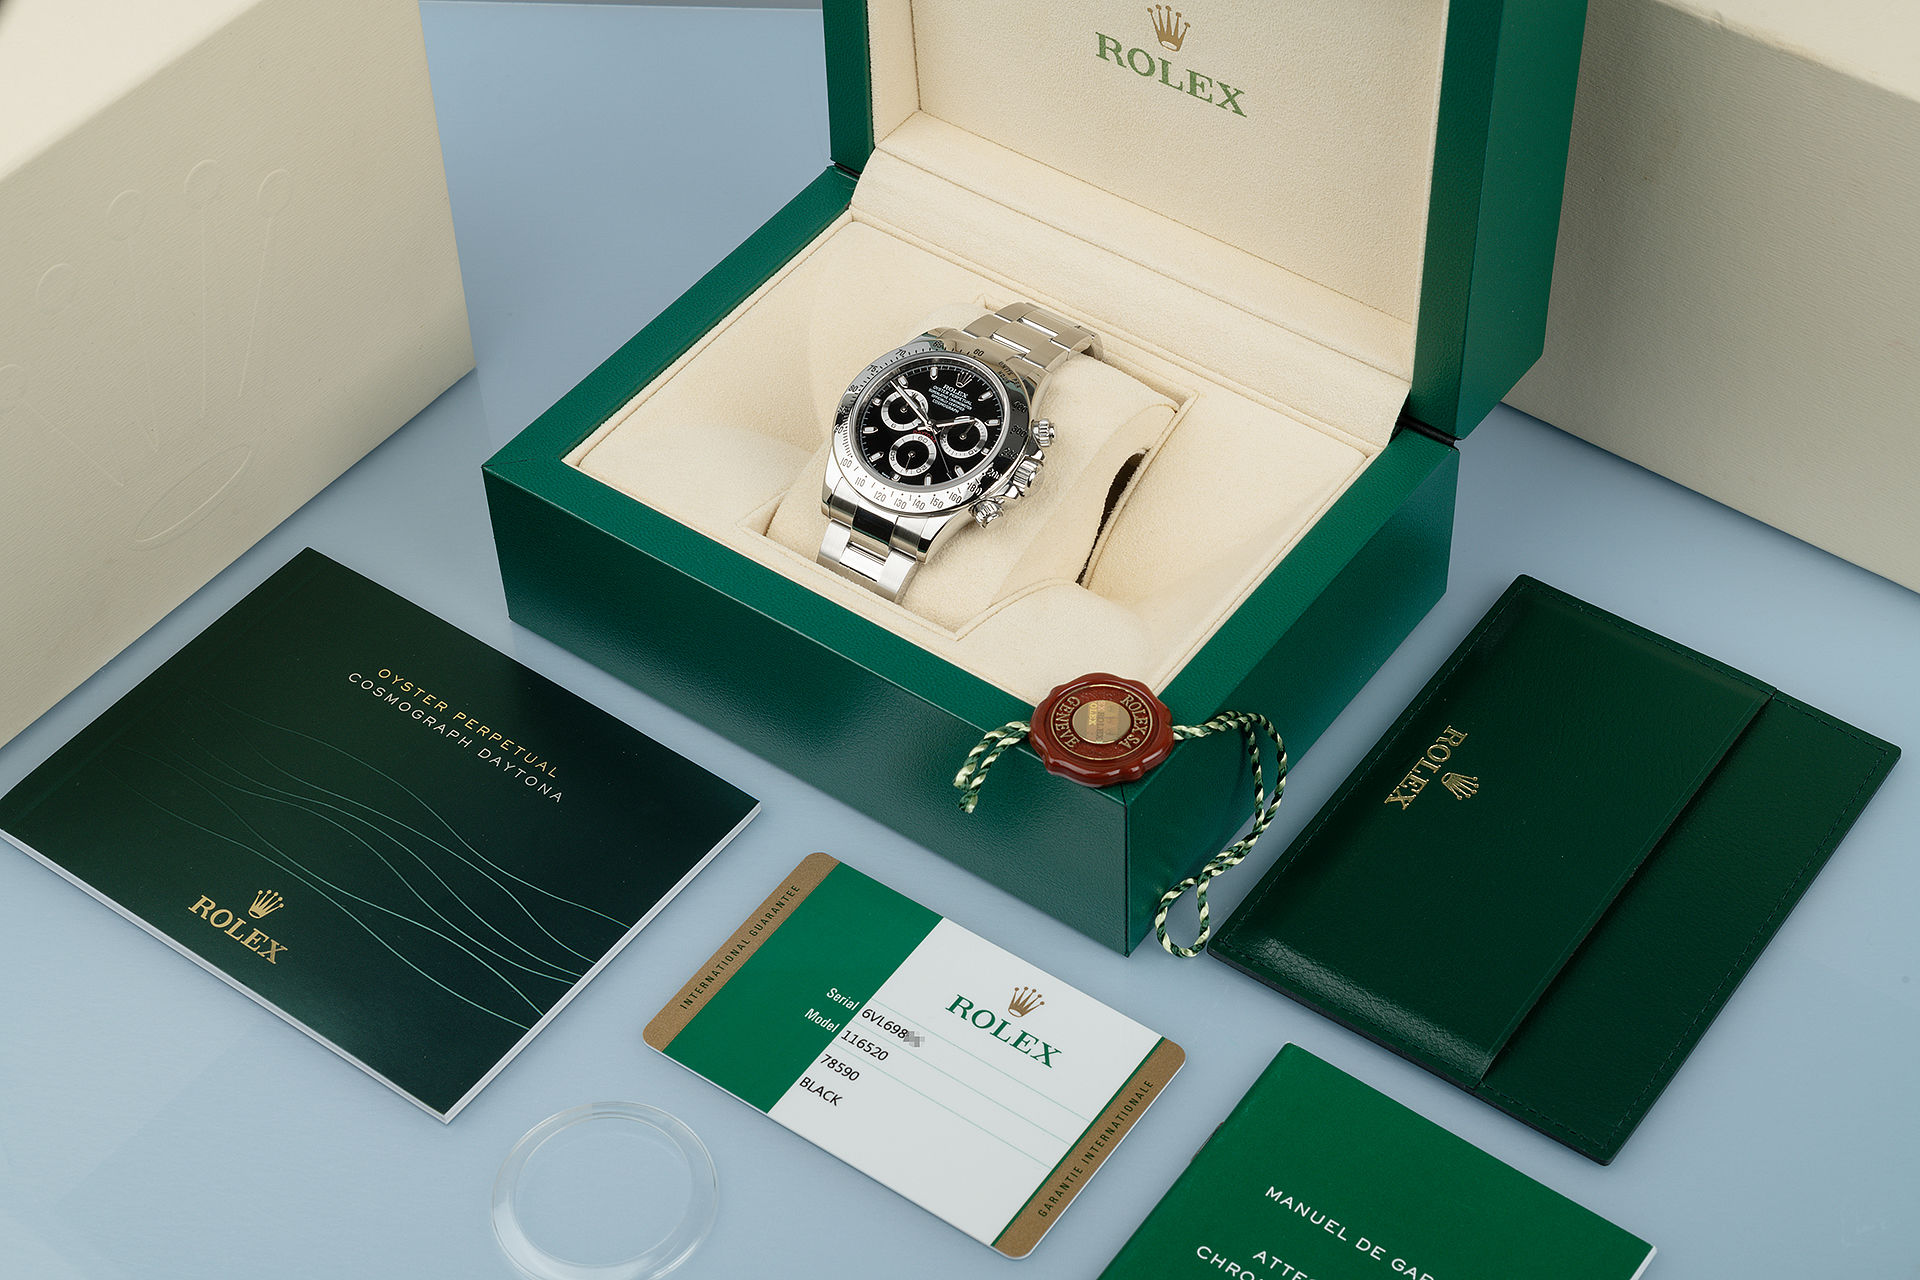 Rolex Cosmograph Daytona Watches | ref 116520 | Complete Set | The ...